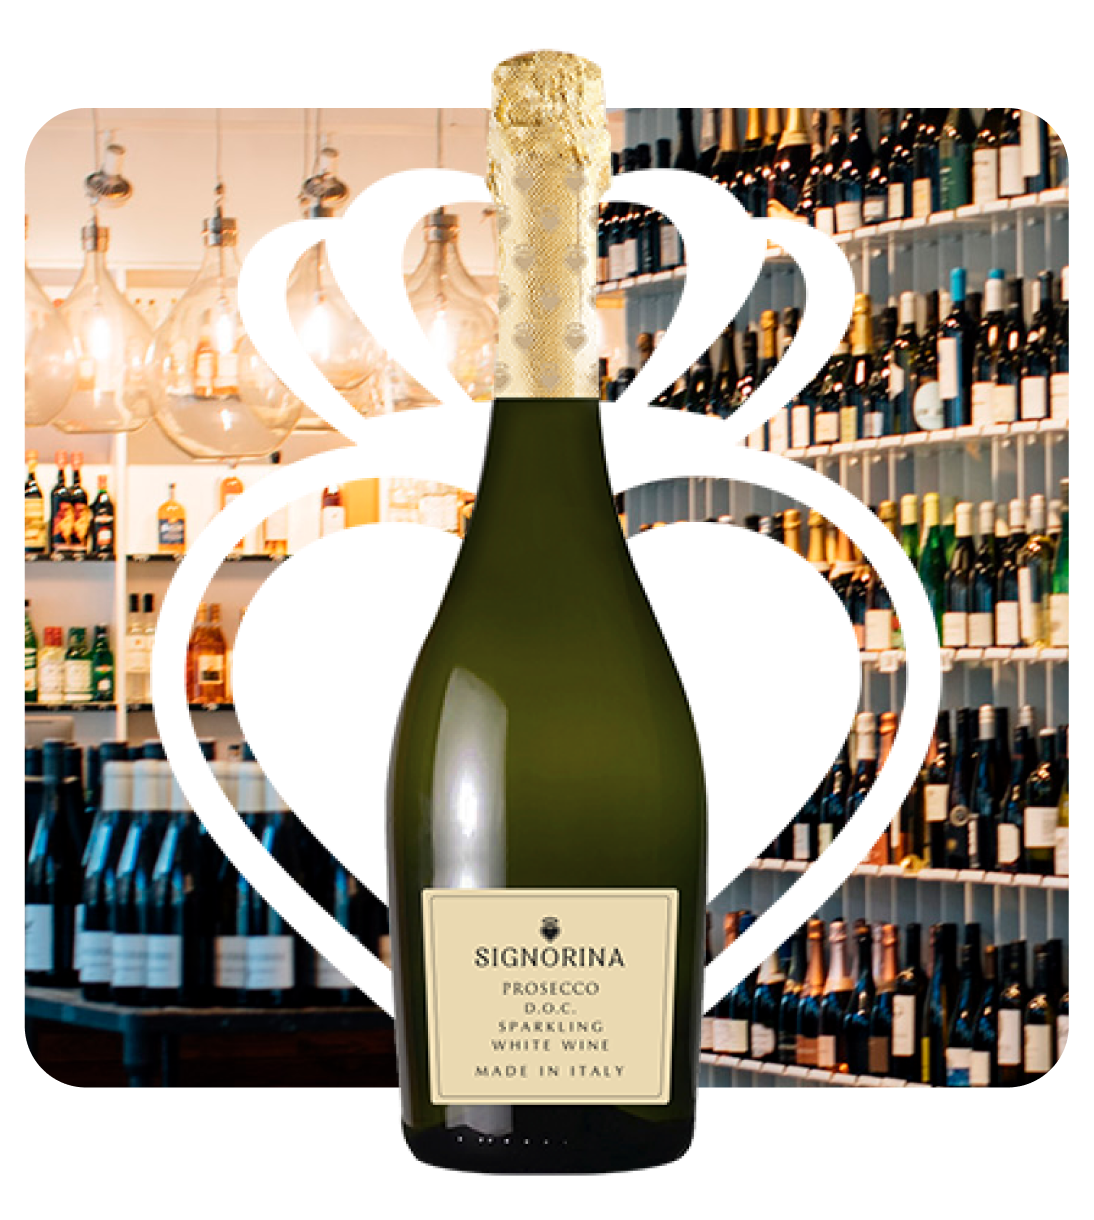 Prosecco.com - Agency Services for Retailers